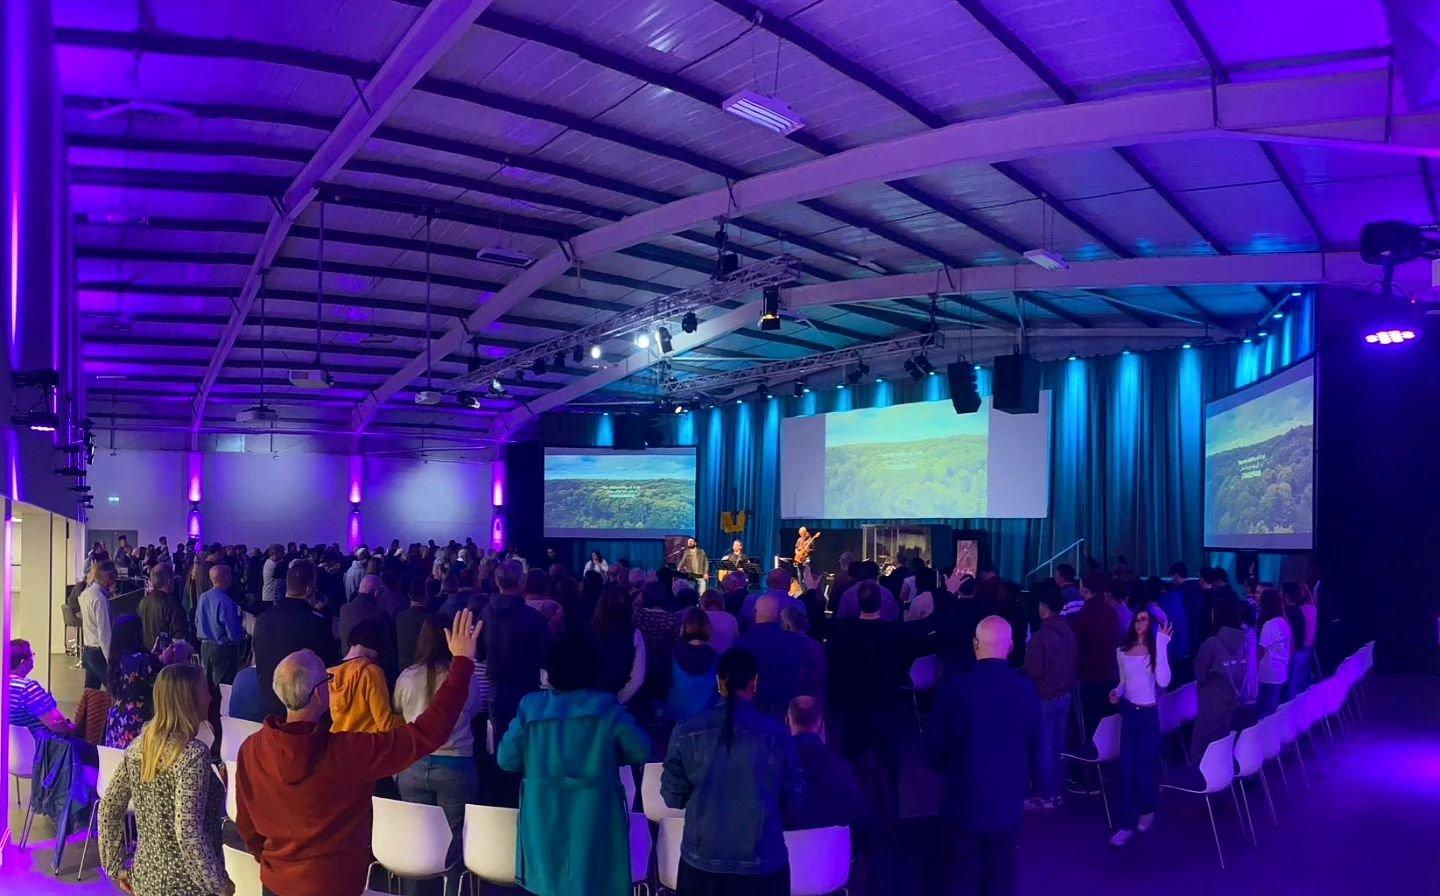 We had a great time last Sunday! 🙌🏽

Don't forget about this Sunday, we have a Reach Celebration where we'll be worshipping Jesus together with all of our friends and family from different locations! 😊

#pridepark #derbychurch #derbychurches